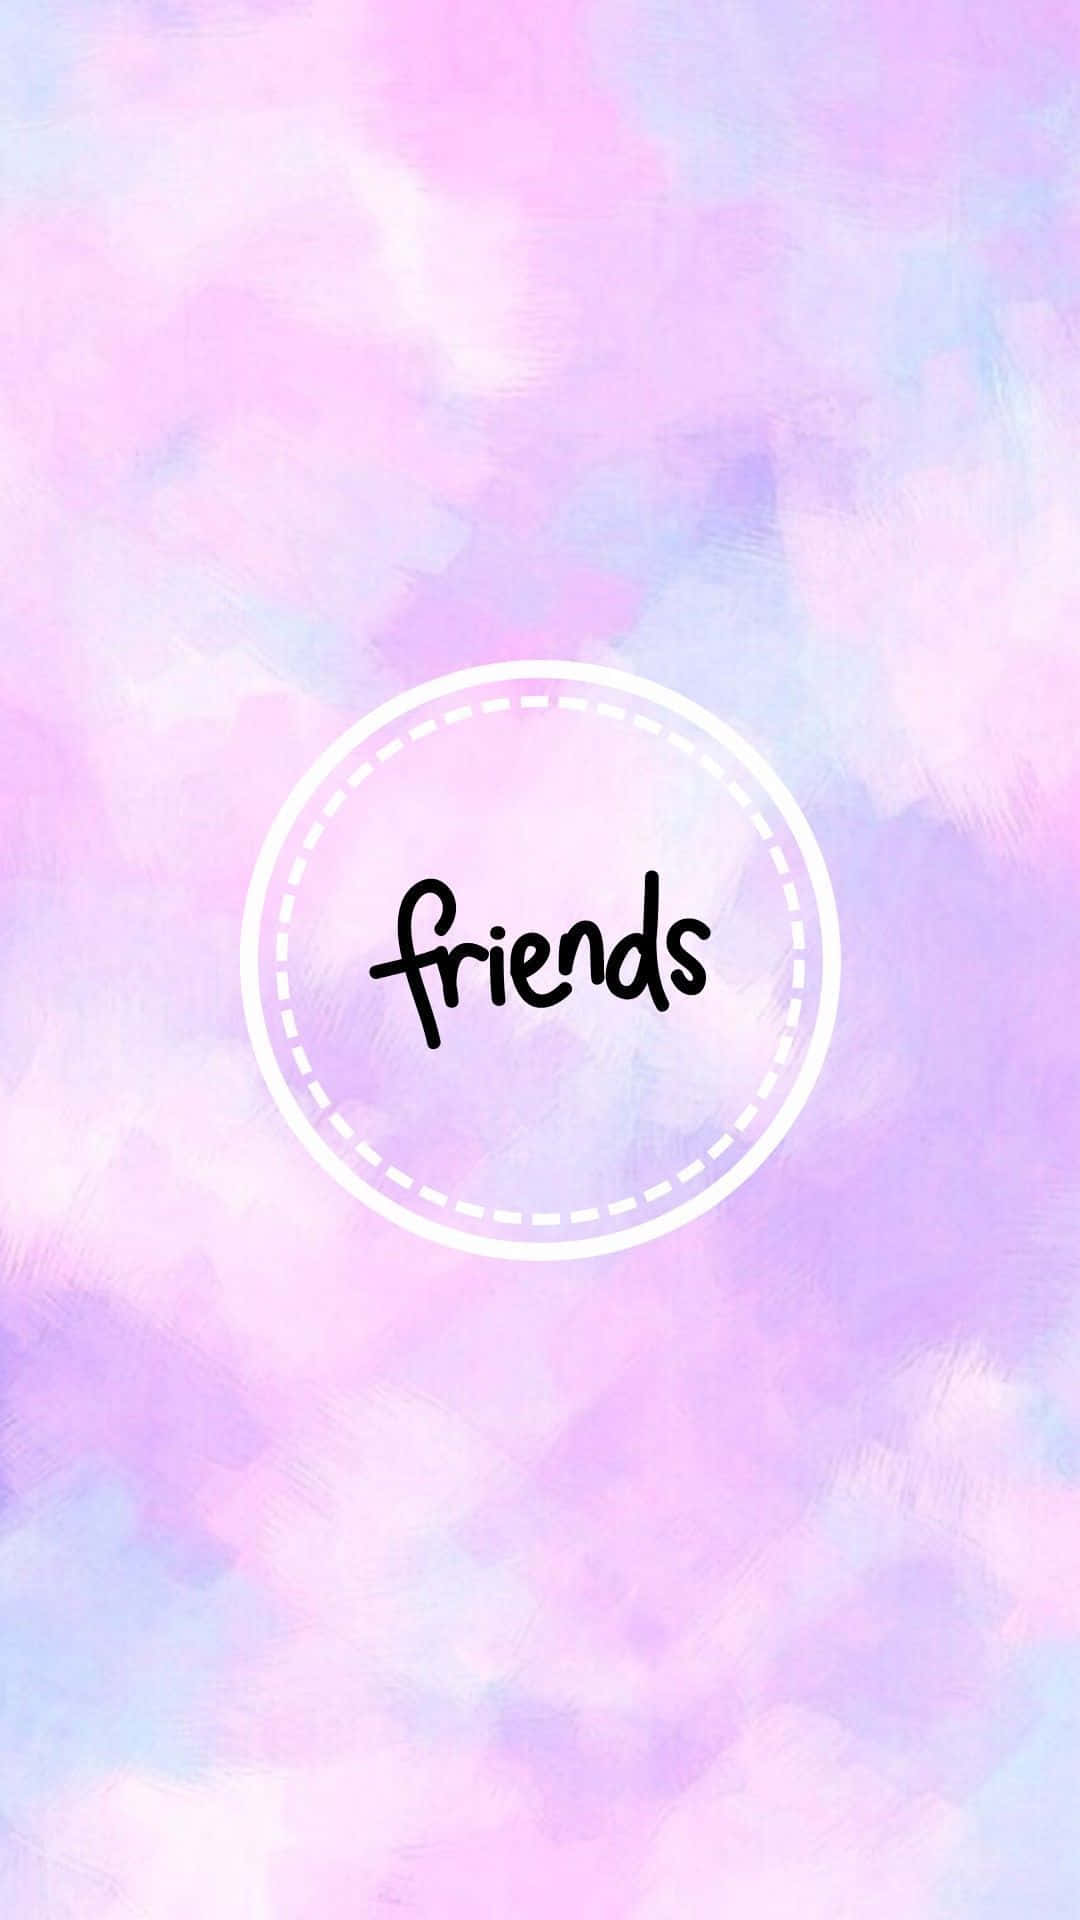 Friends Wallpaper - Wallpapers For Android